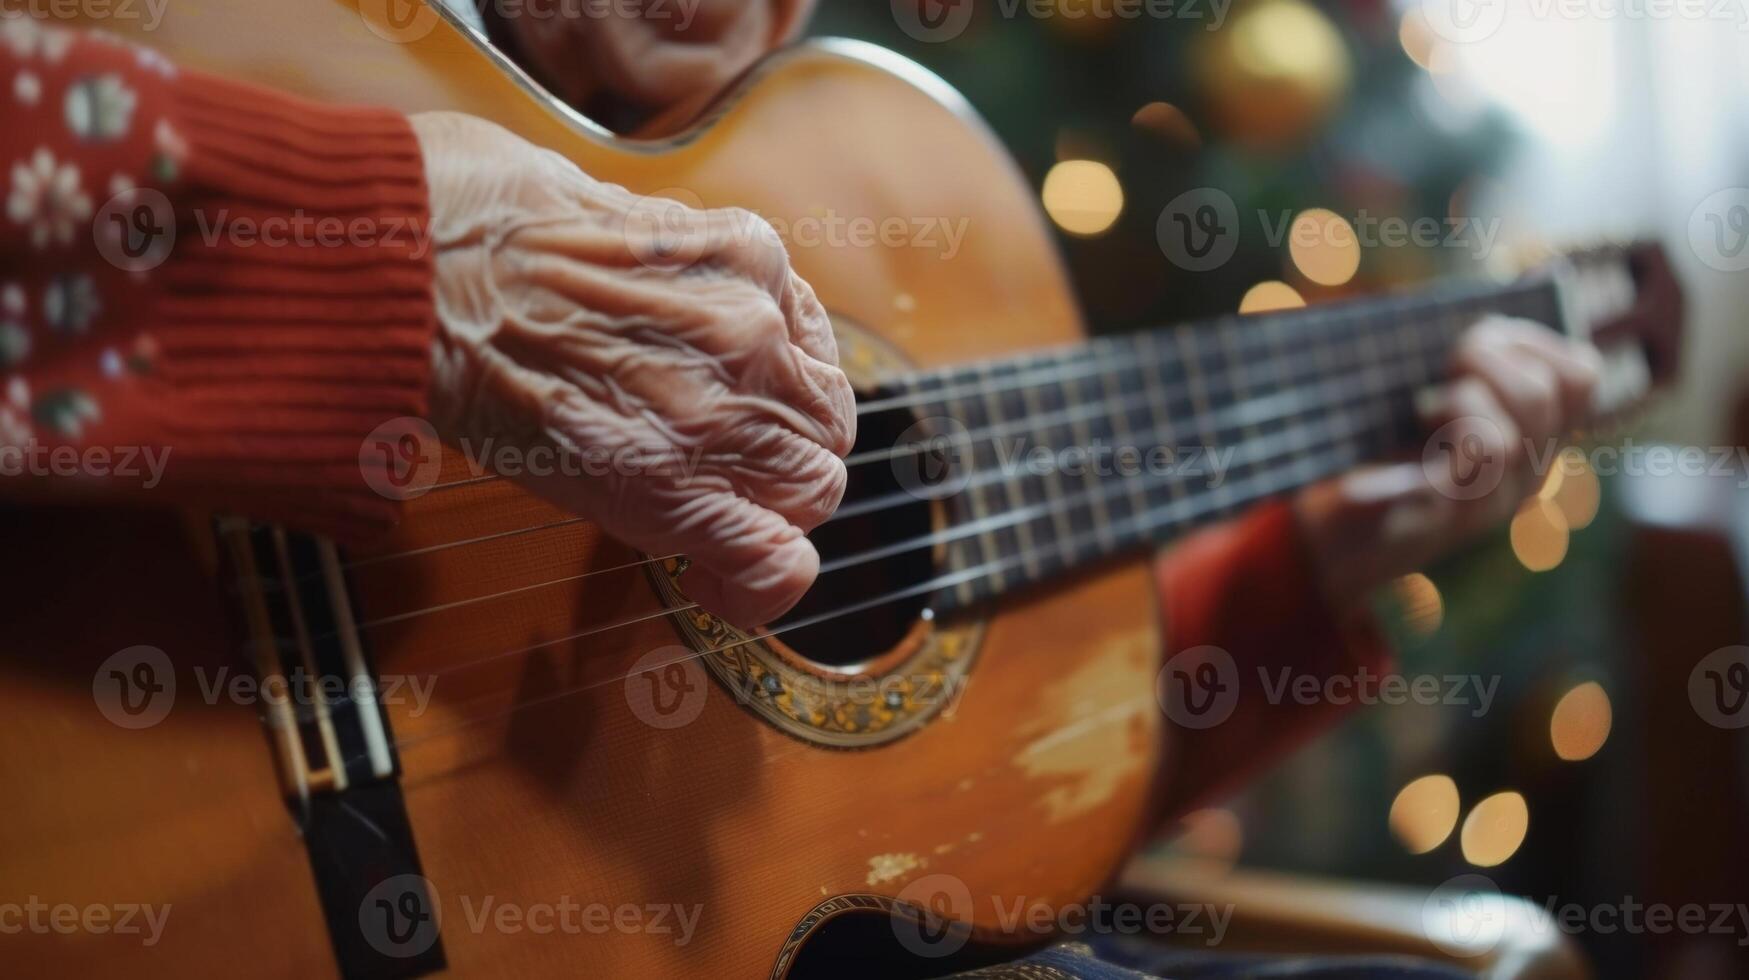 A grandma pulls out her guitar and begins to strum a familiar tune photo